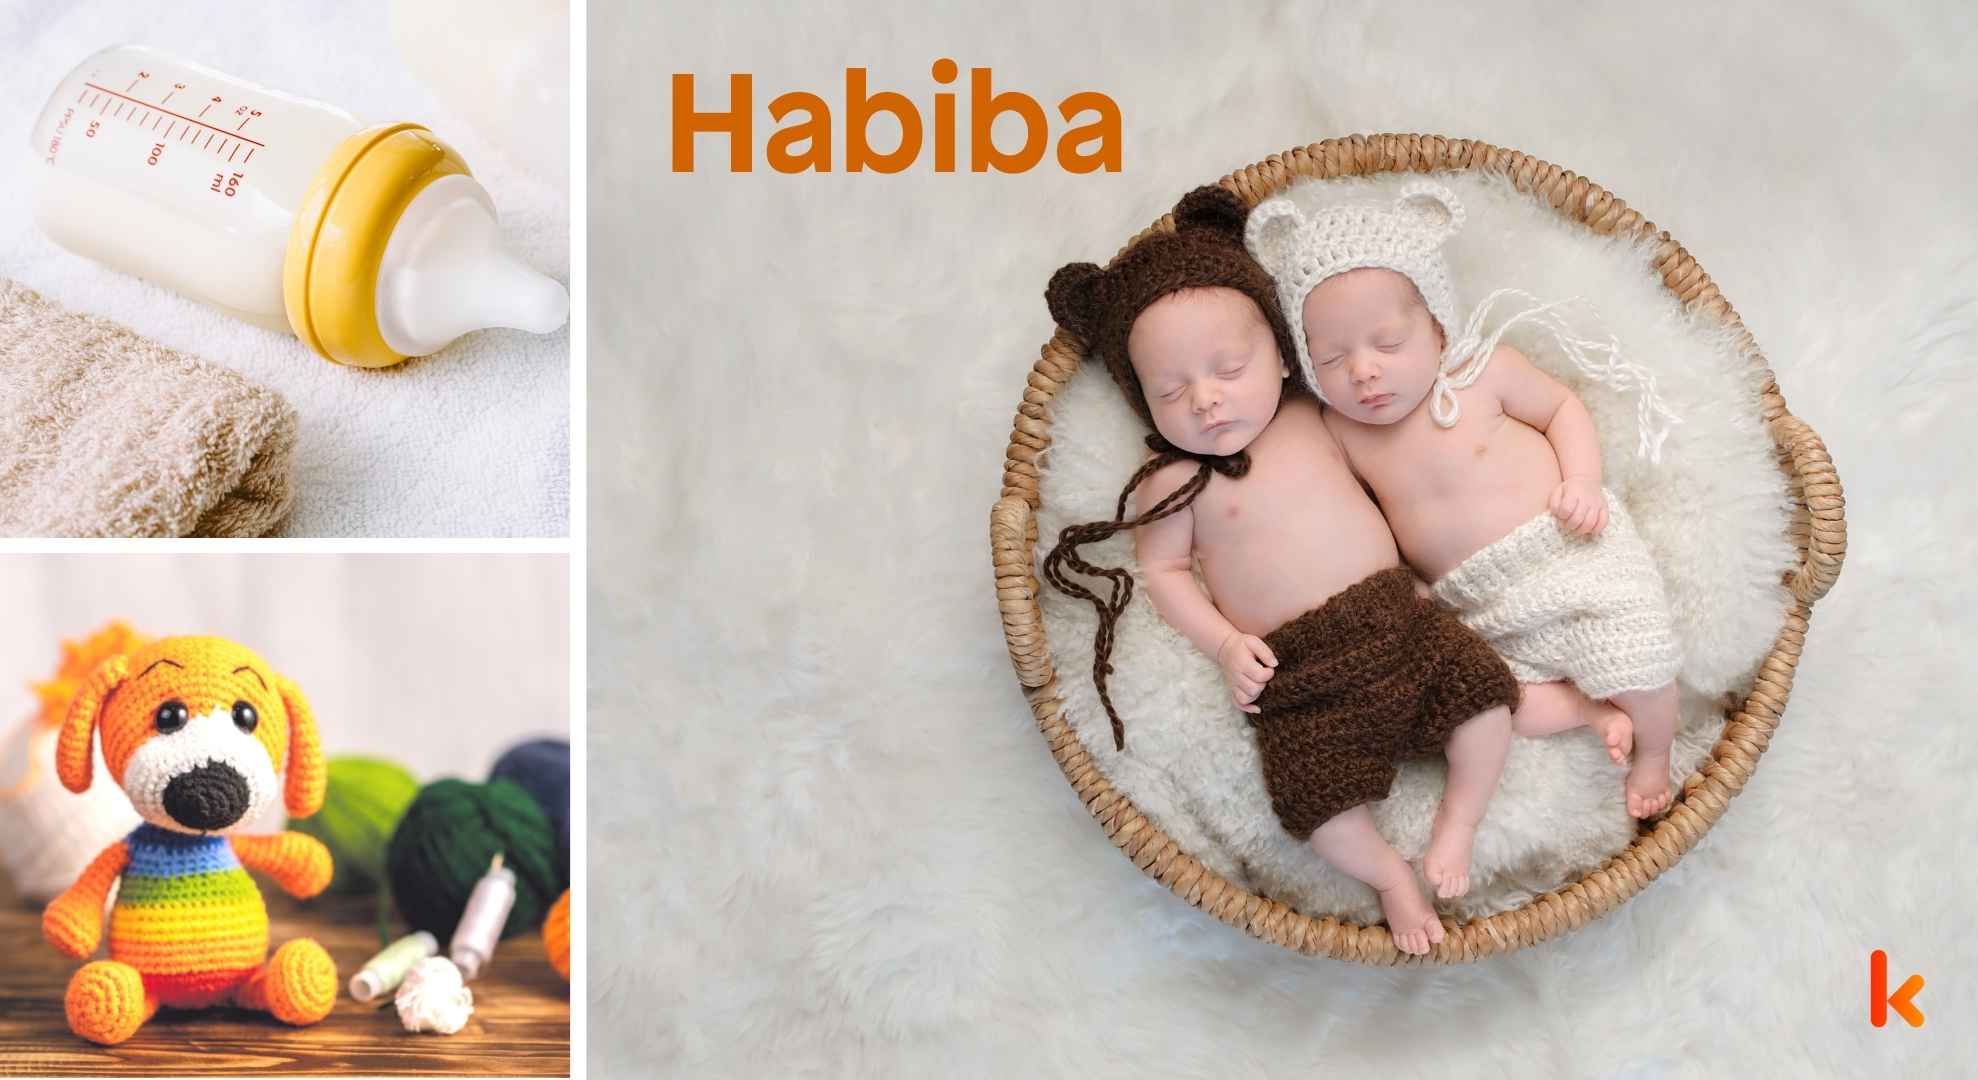 Meaning of the name Habiba